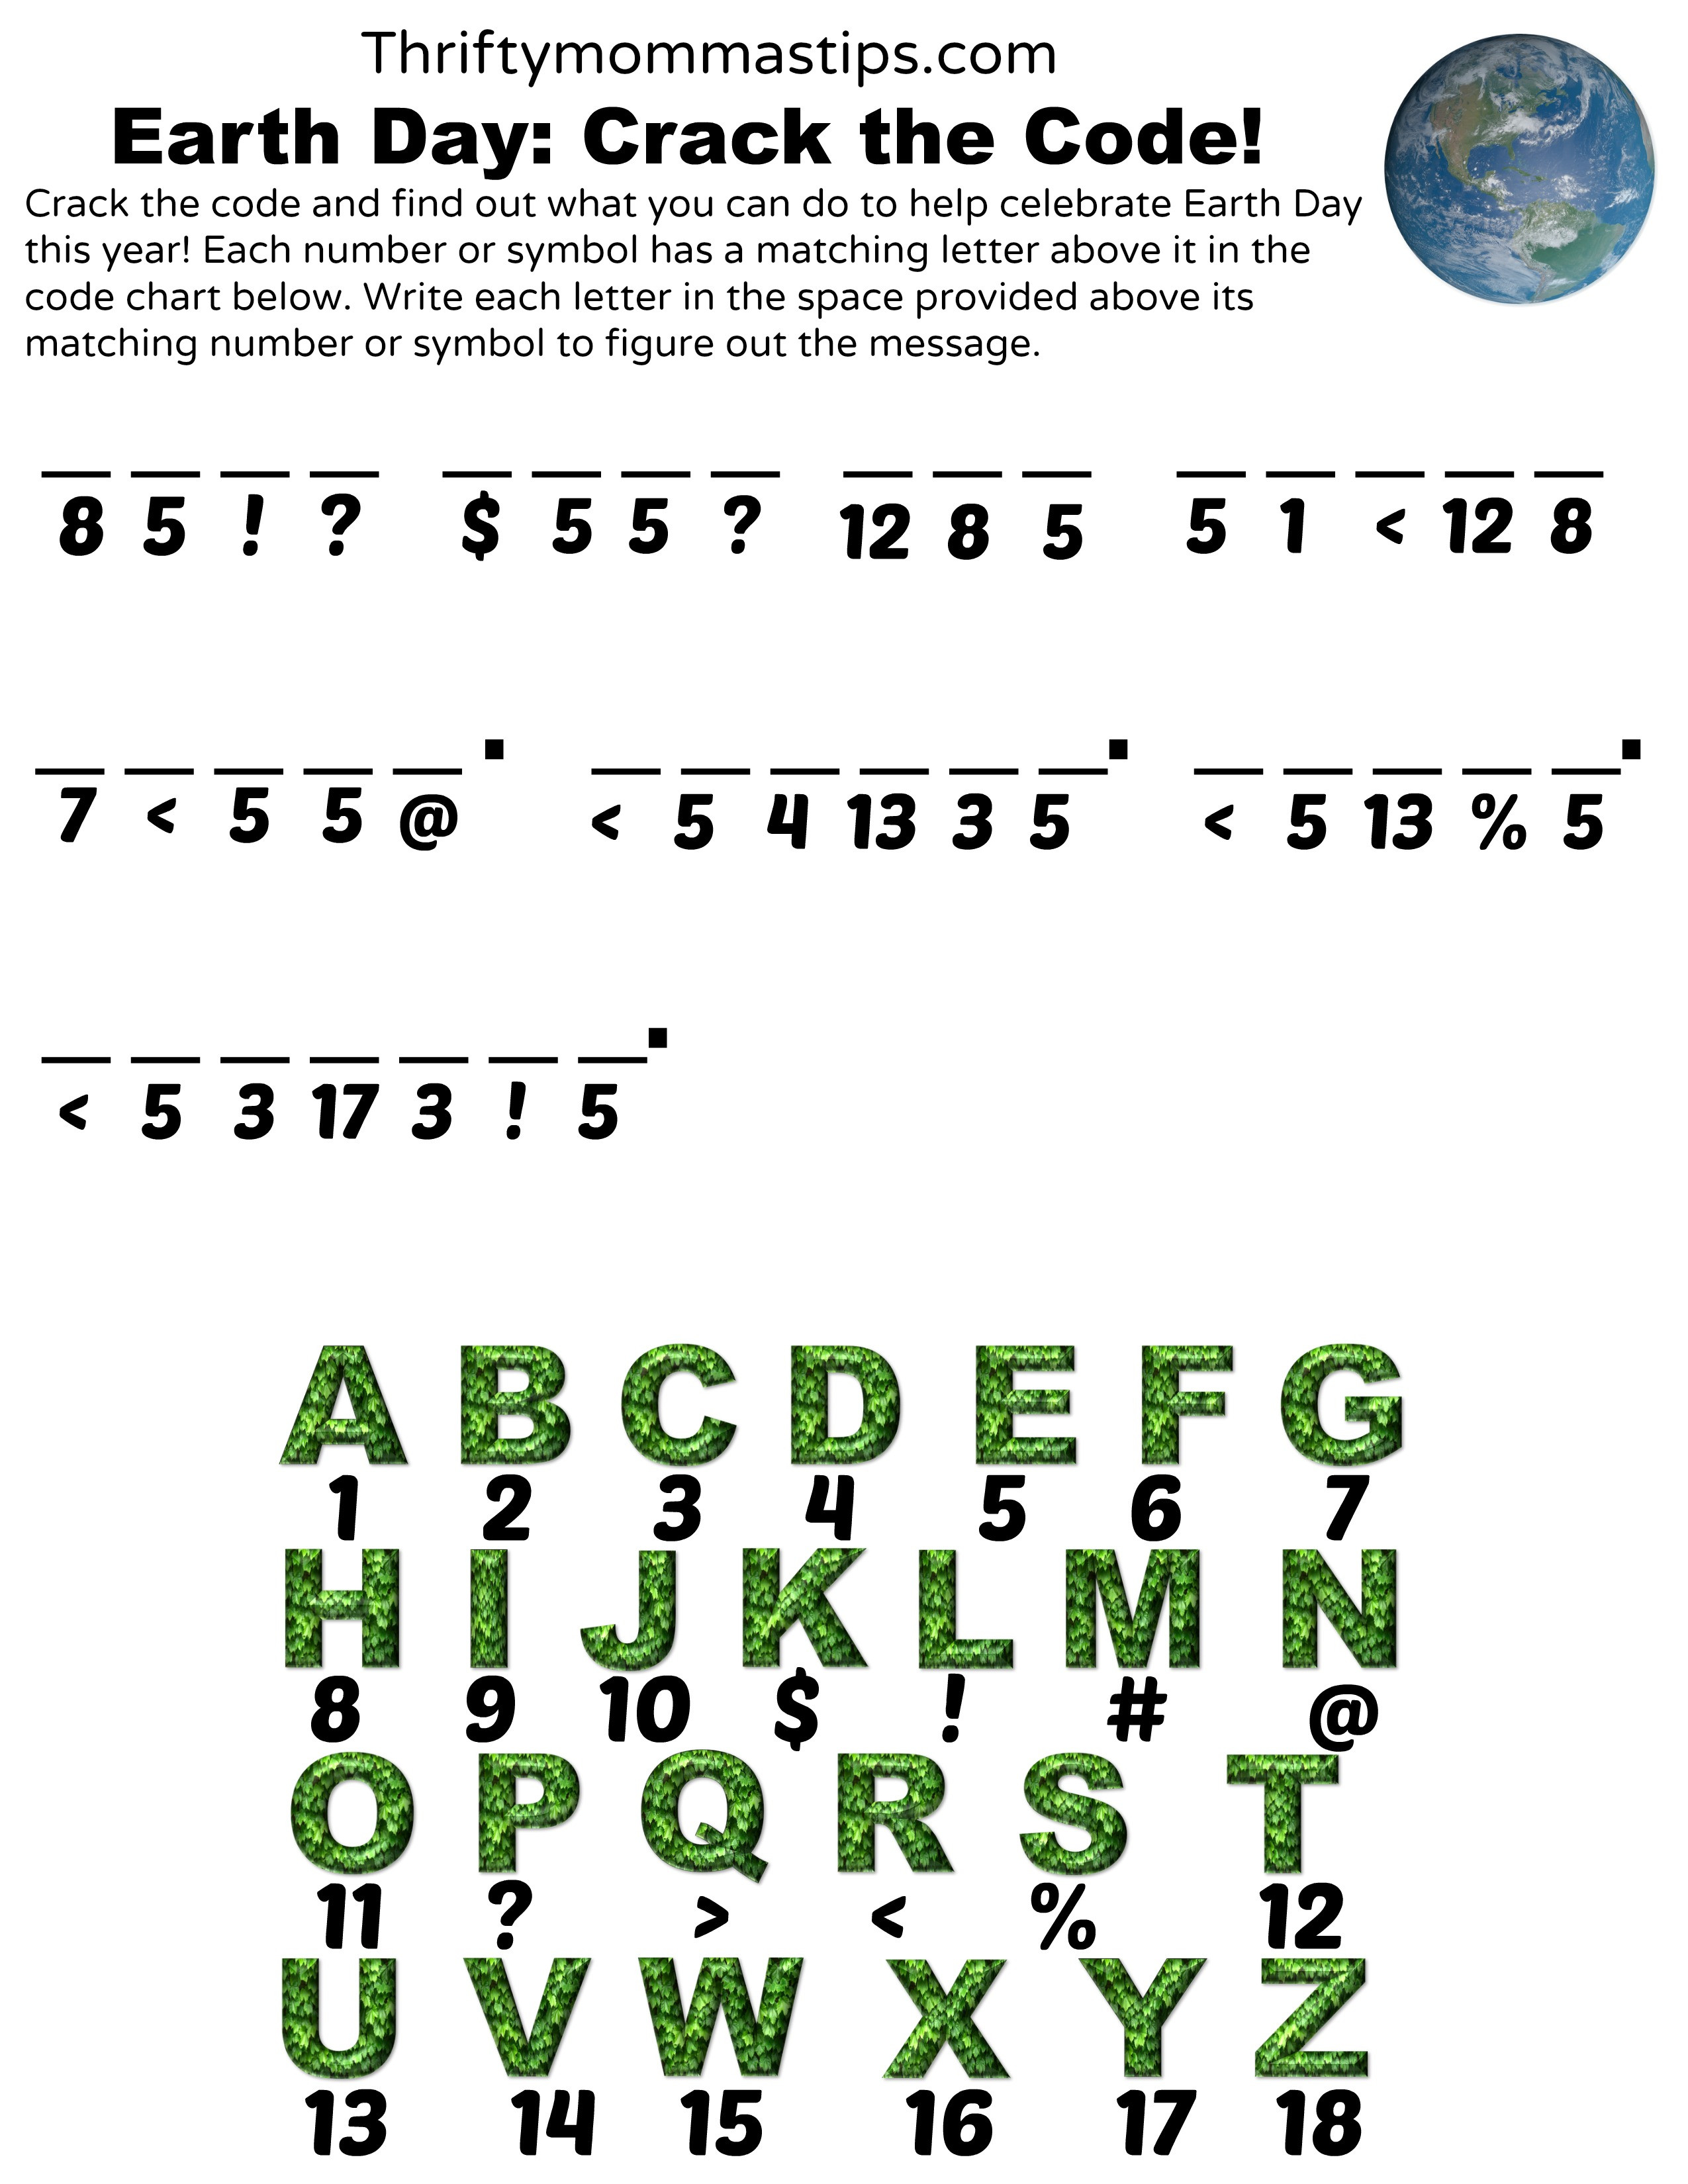 Crack the Code Worksheets Printable Earth Day Crack the Code Printable Thrifty Mommas Tips